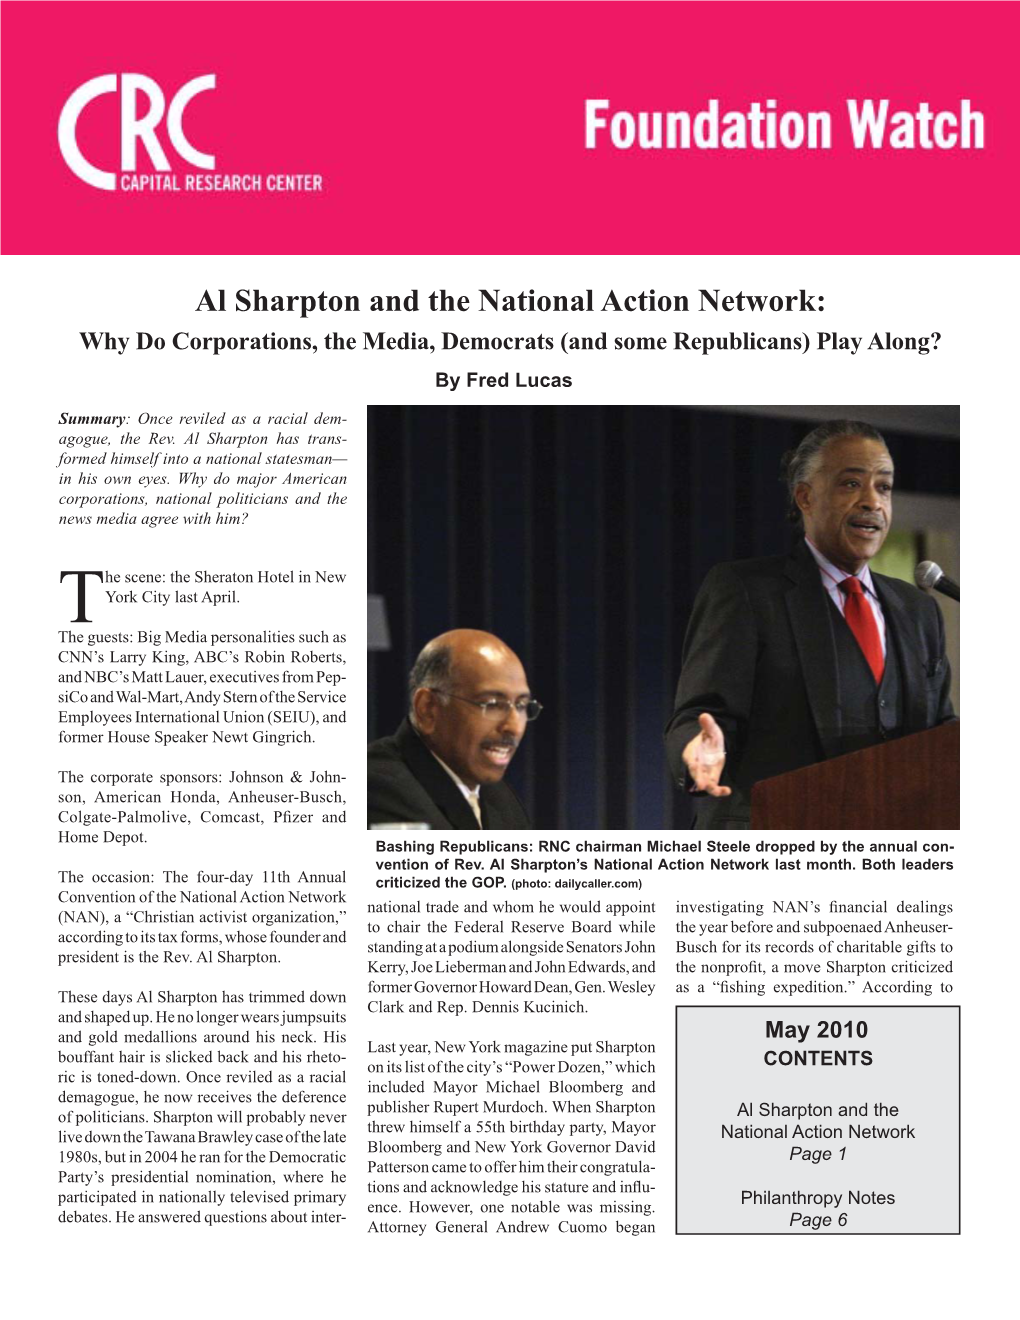 Al Sharpton and the National Action Network: Why Do Corporations, the Media, Democrats (And Some Republicans) Play Along? by Fred Lucas